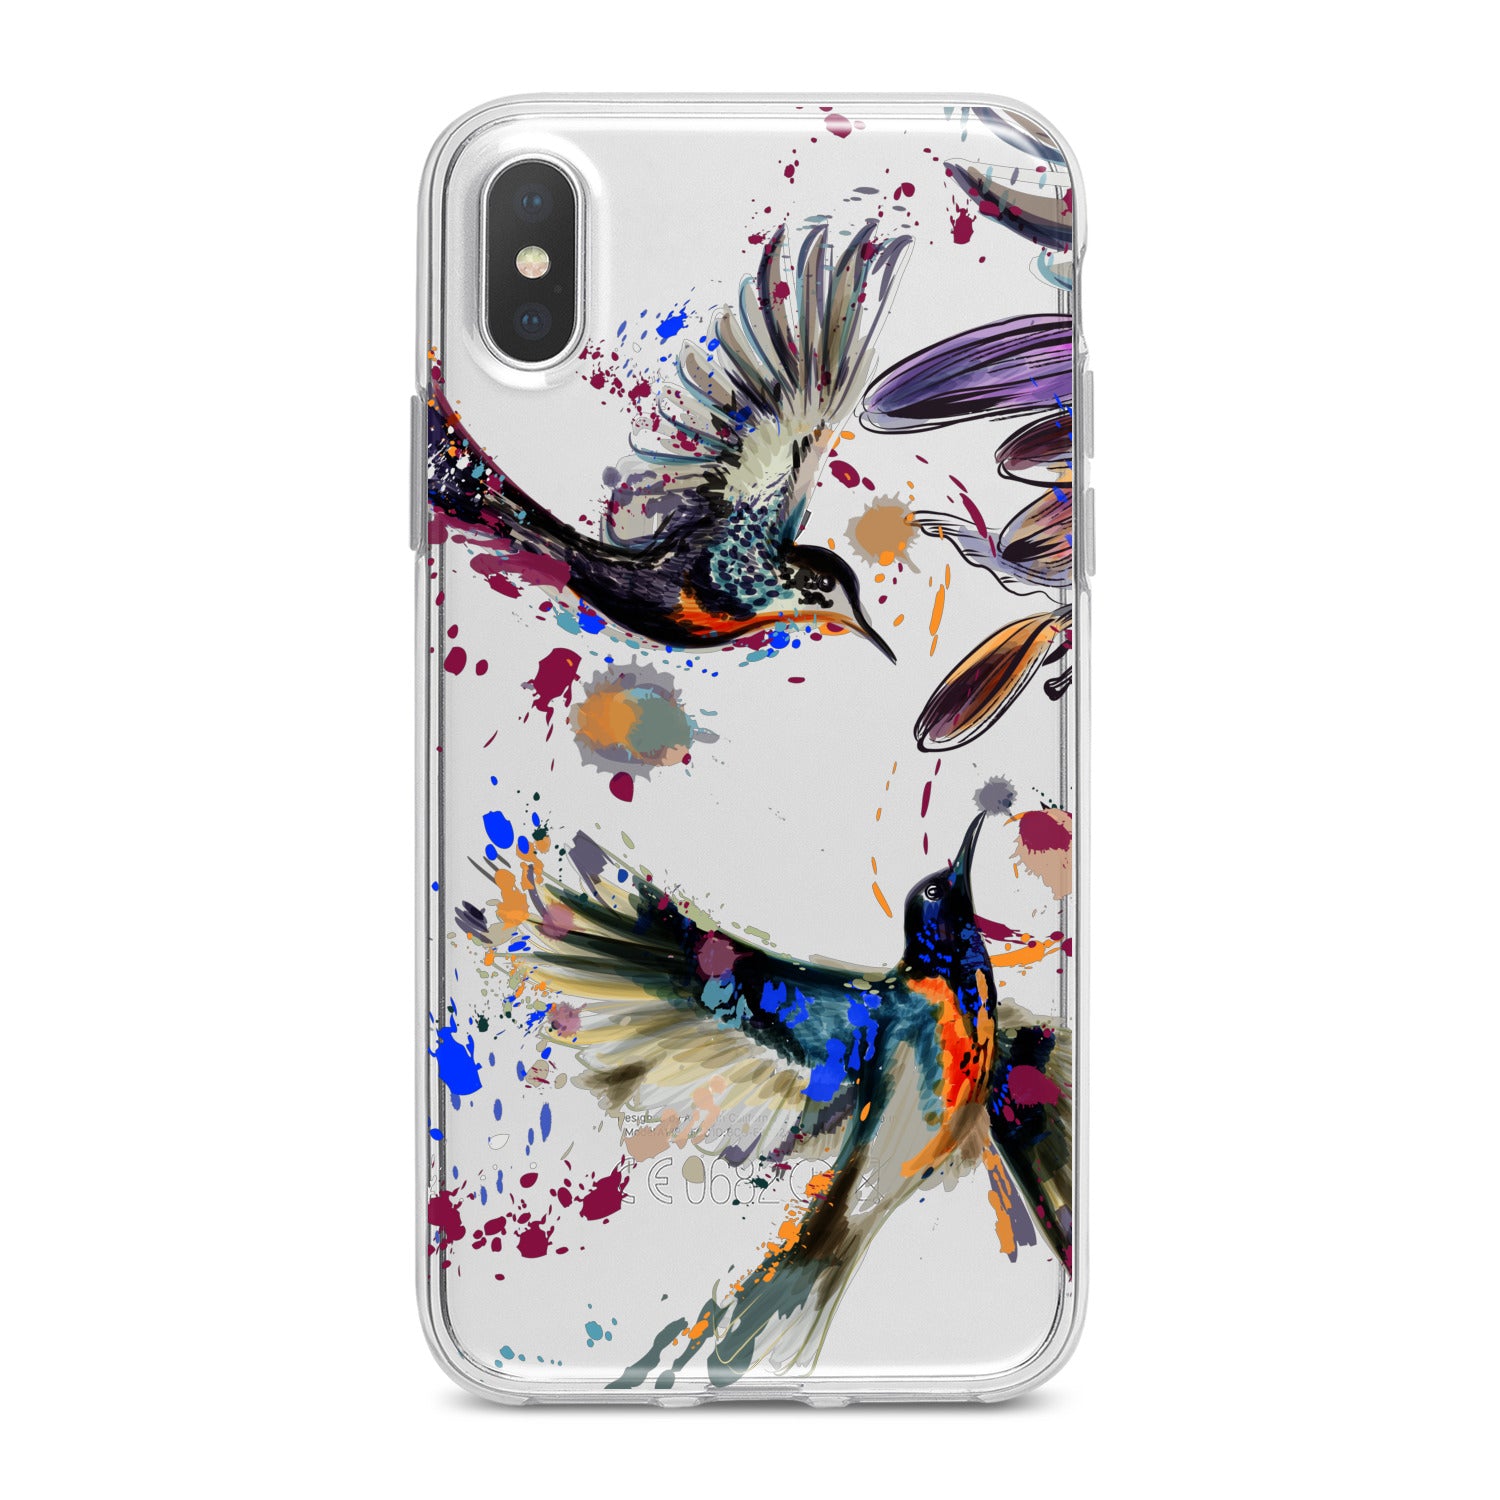 Lex Altern Watercolor Birds Phone Case for your iPhone & Android phone.